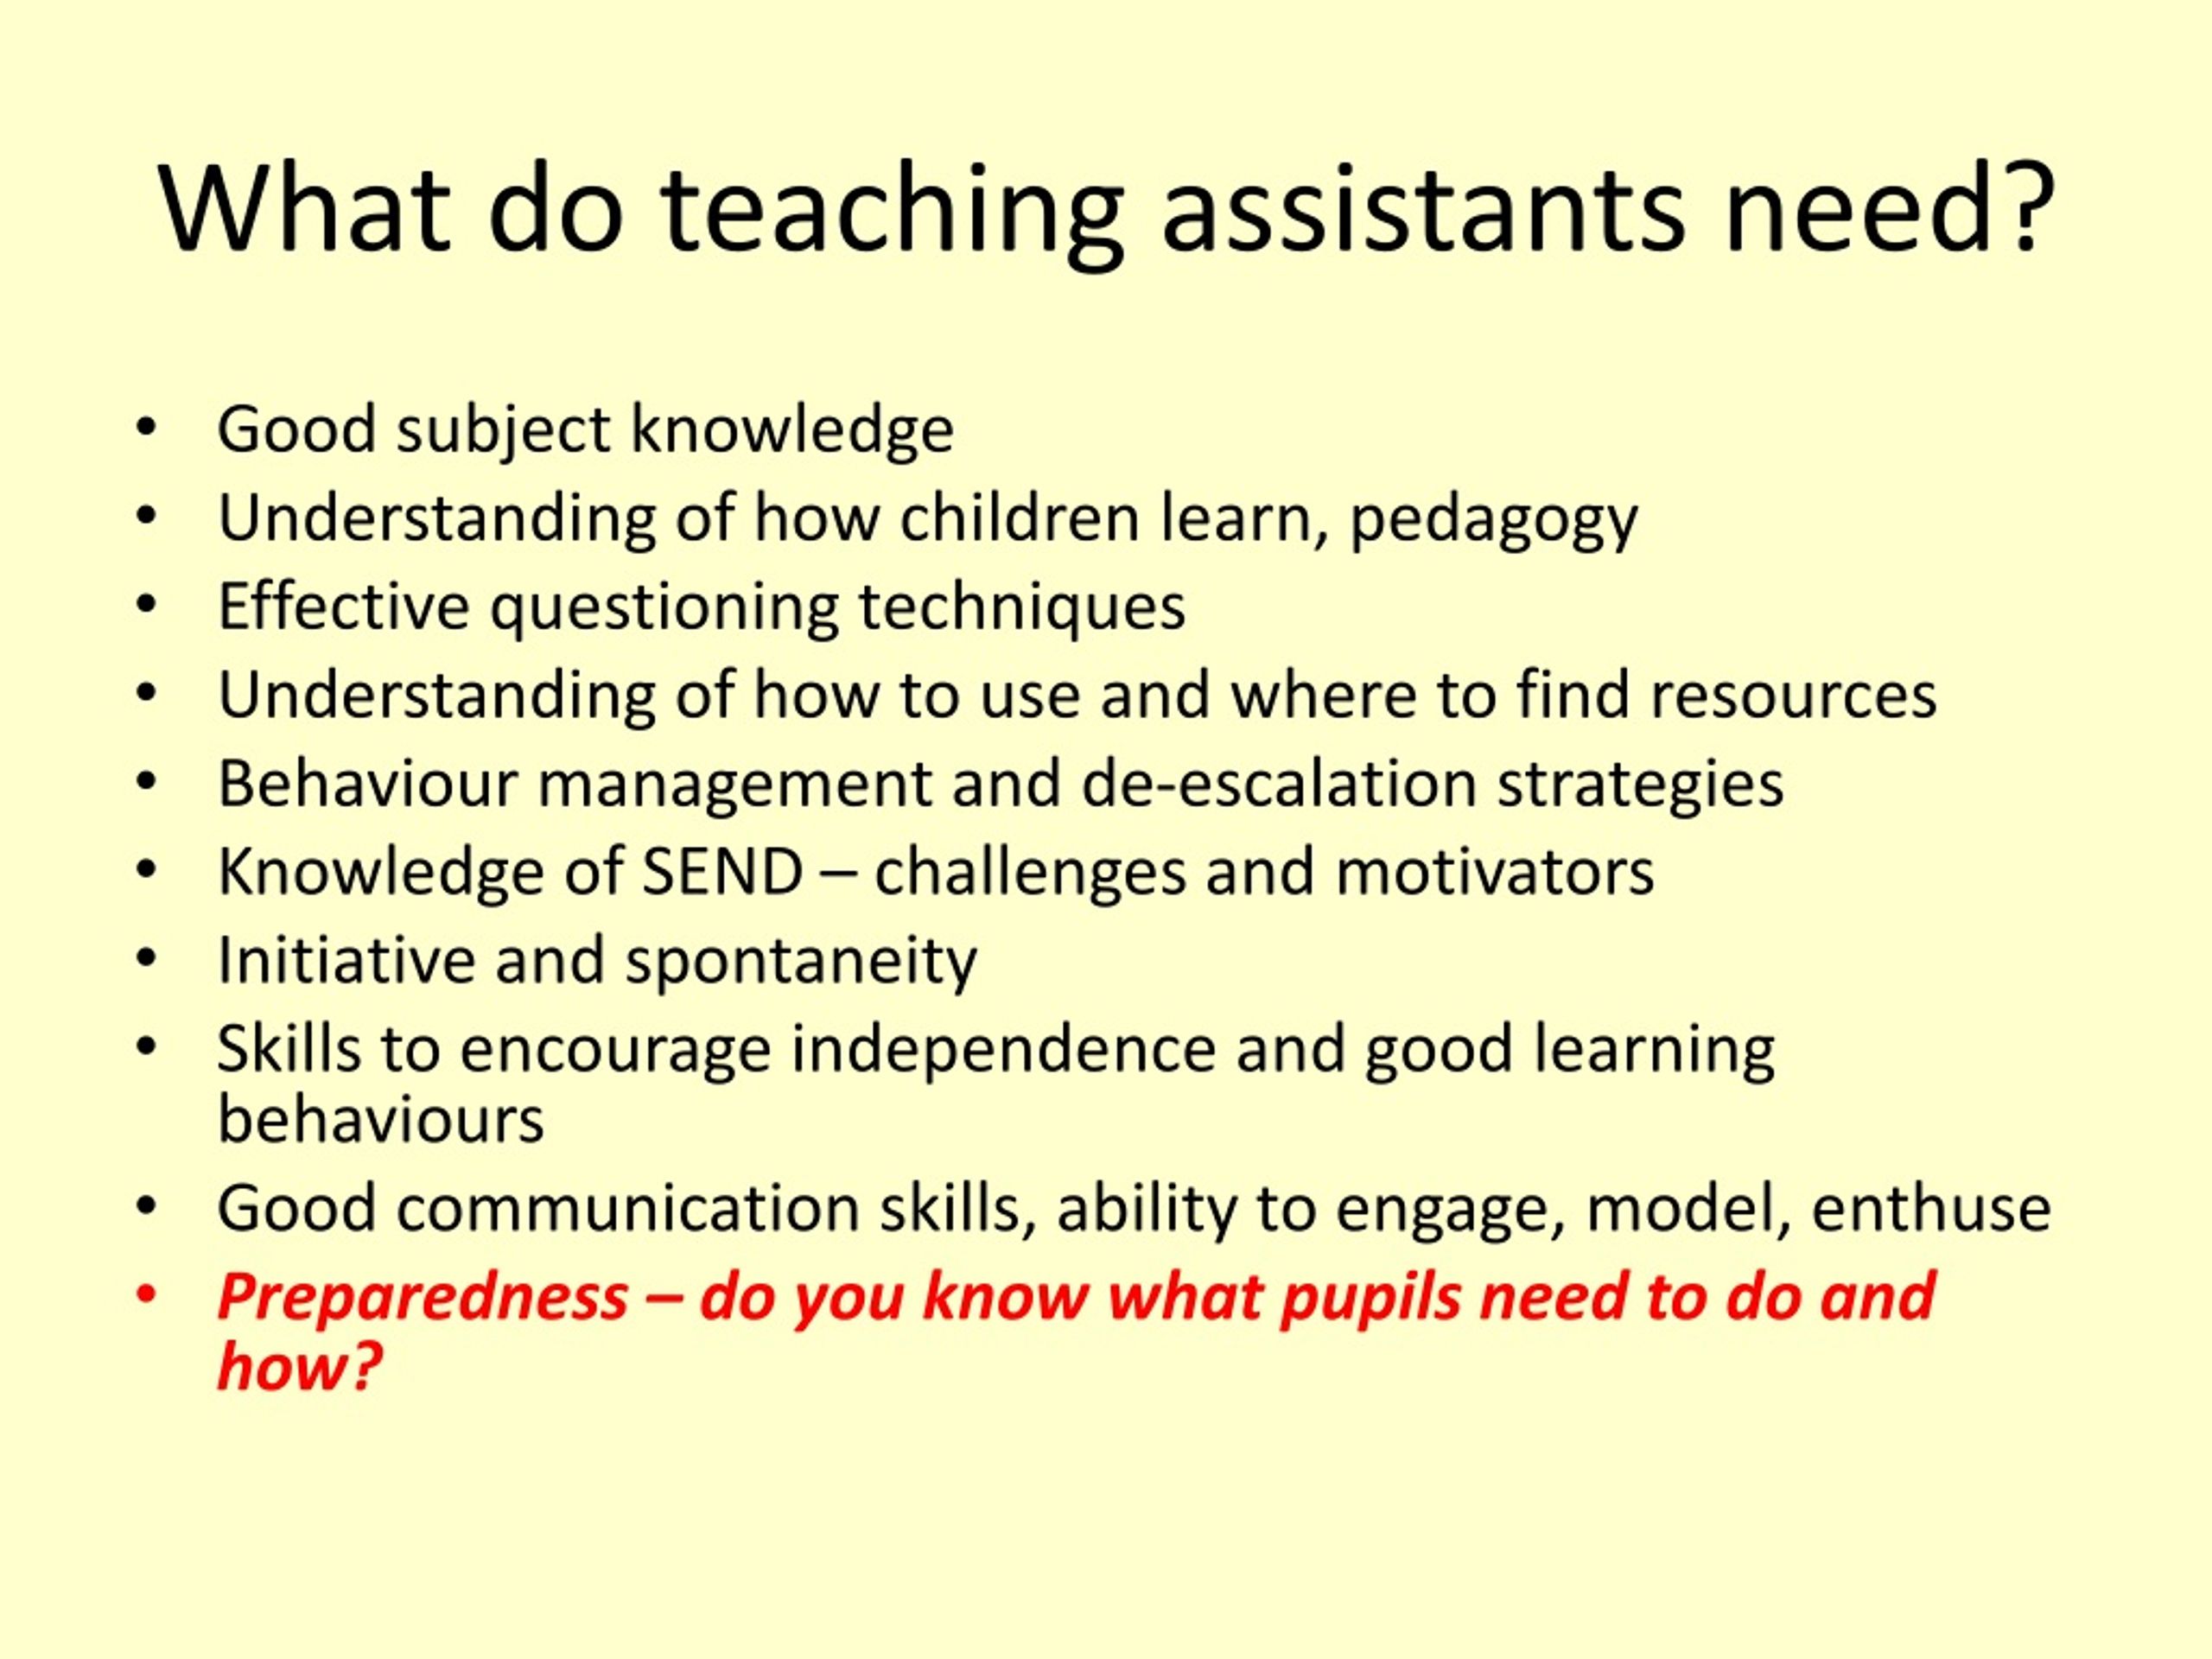 Ppt The Role Of Teaching Assistants In The Classroom Powerpoint Presentation Id483191 